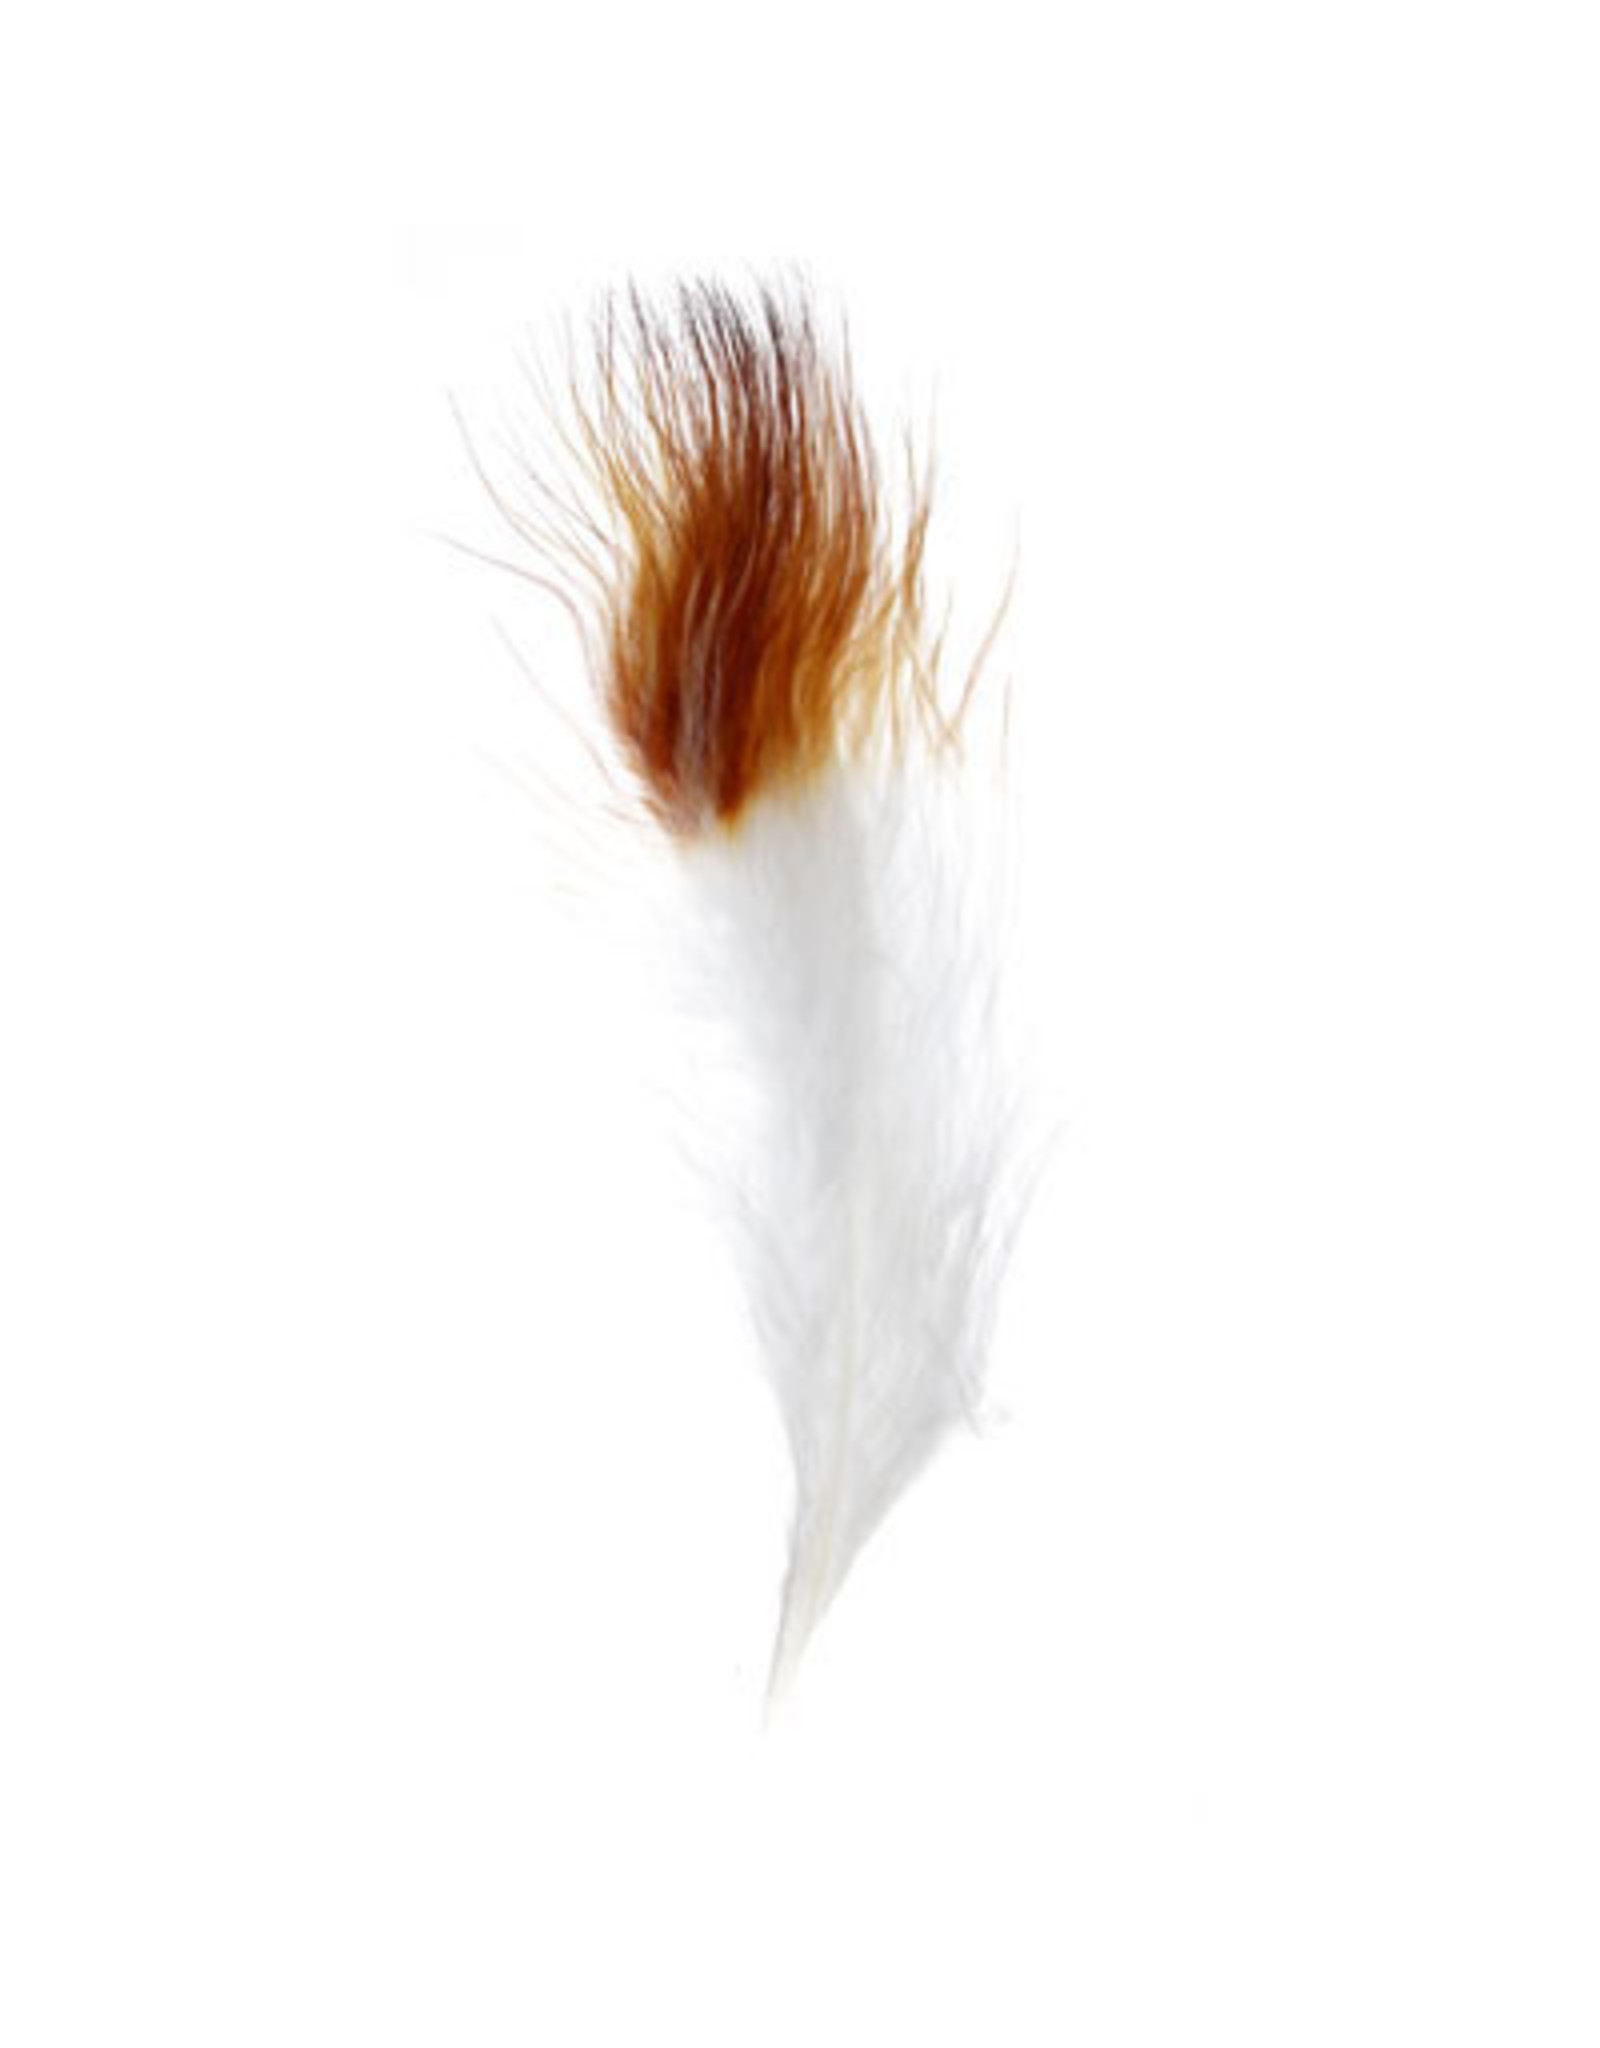 Marabou Feathers 4-6in White Brown Tip  6g